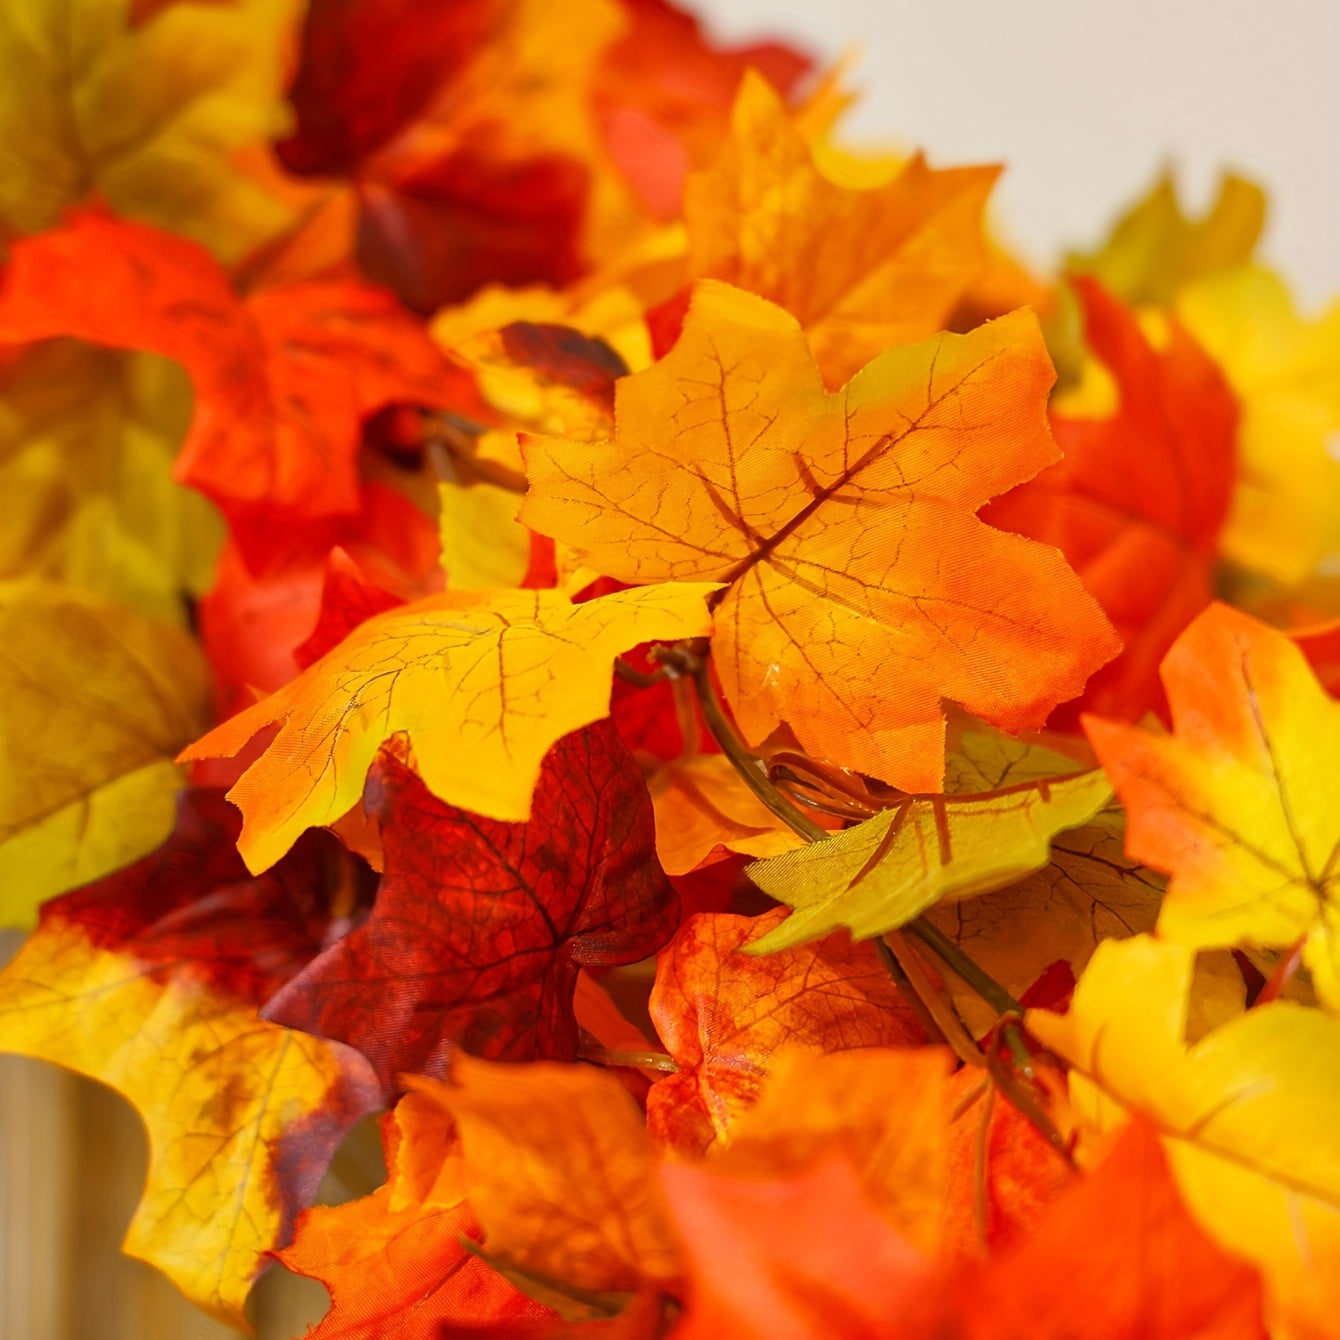 1pc Artificial Fall Maple Leaf Garland, Simulation Autumn Leaves Garland For Thanksgiving Halloween Maple Syrup Festivals Wedding (66.93inch)